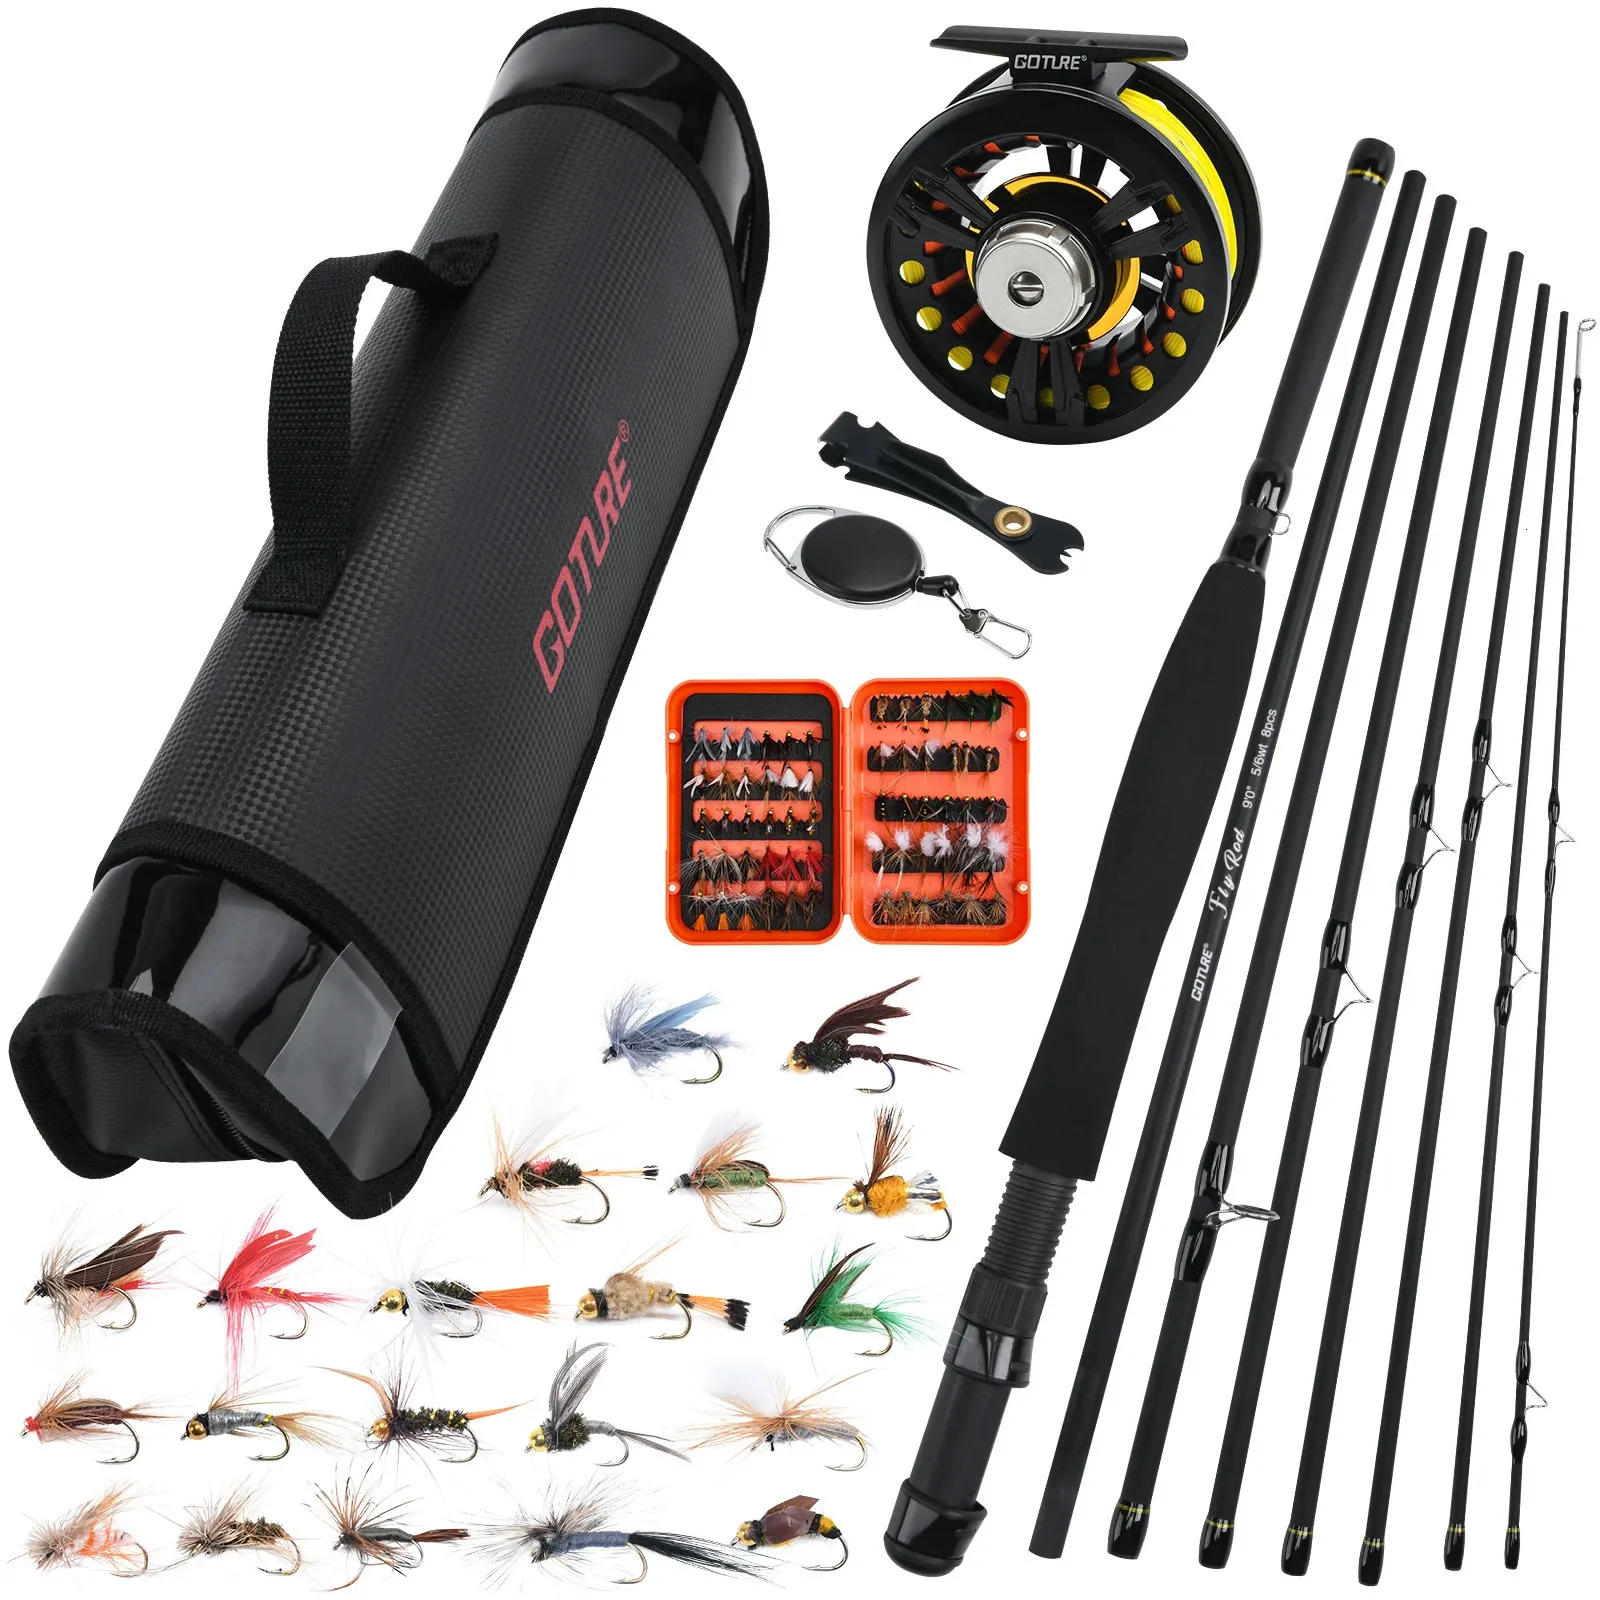 TravelFly 8 Section Fishing Rod Kit Reel, Line, Lure, & Tackle Set For  Flyfishing And Streams 231211 From Zhi09, $74.4